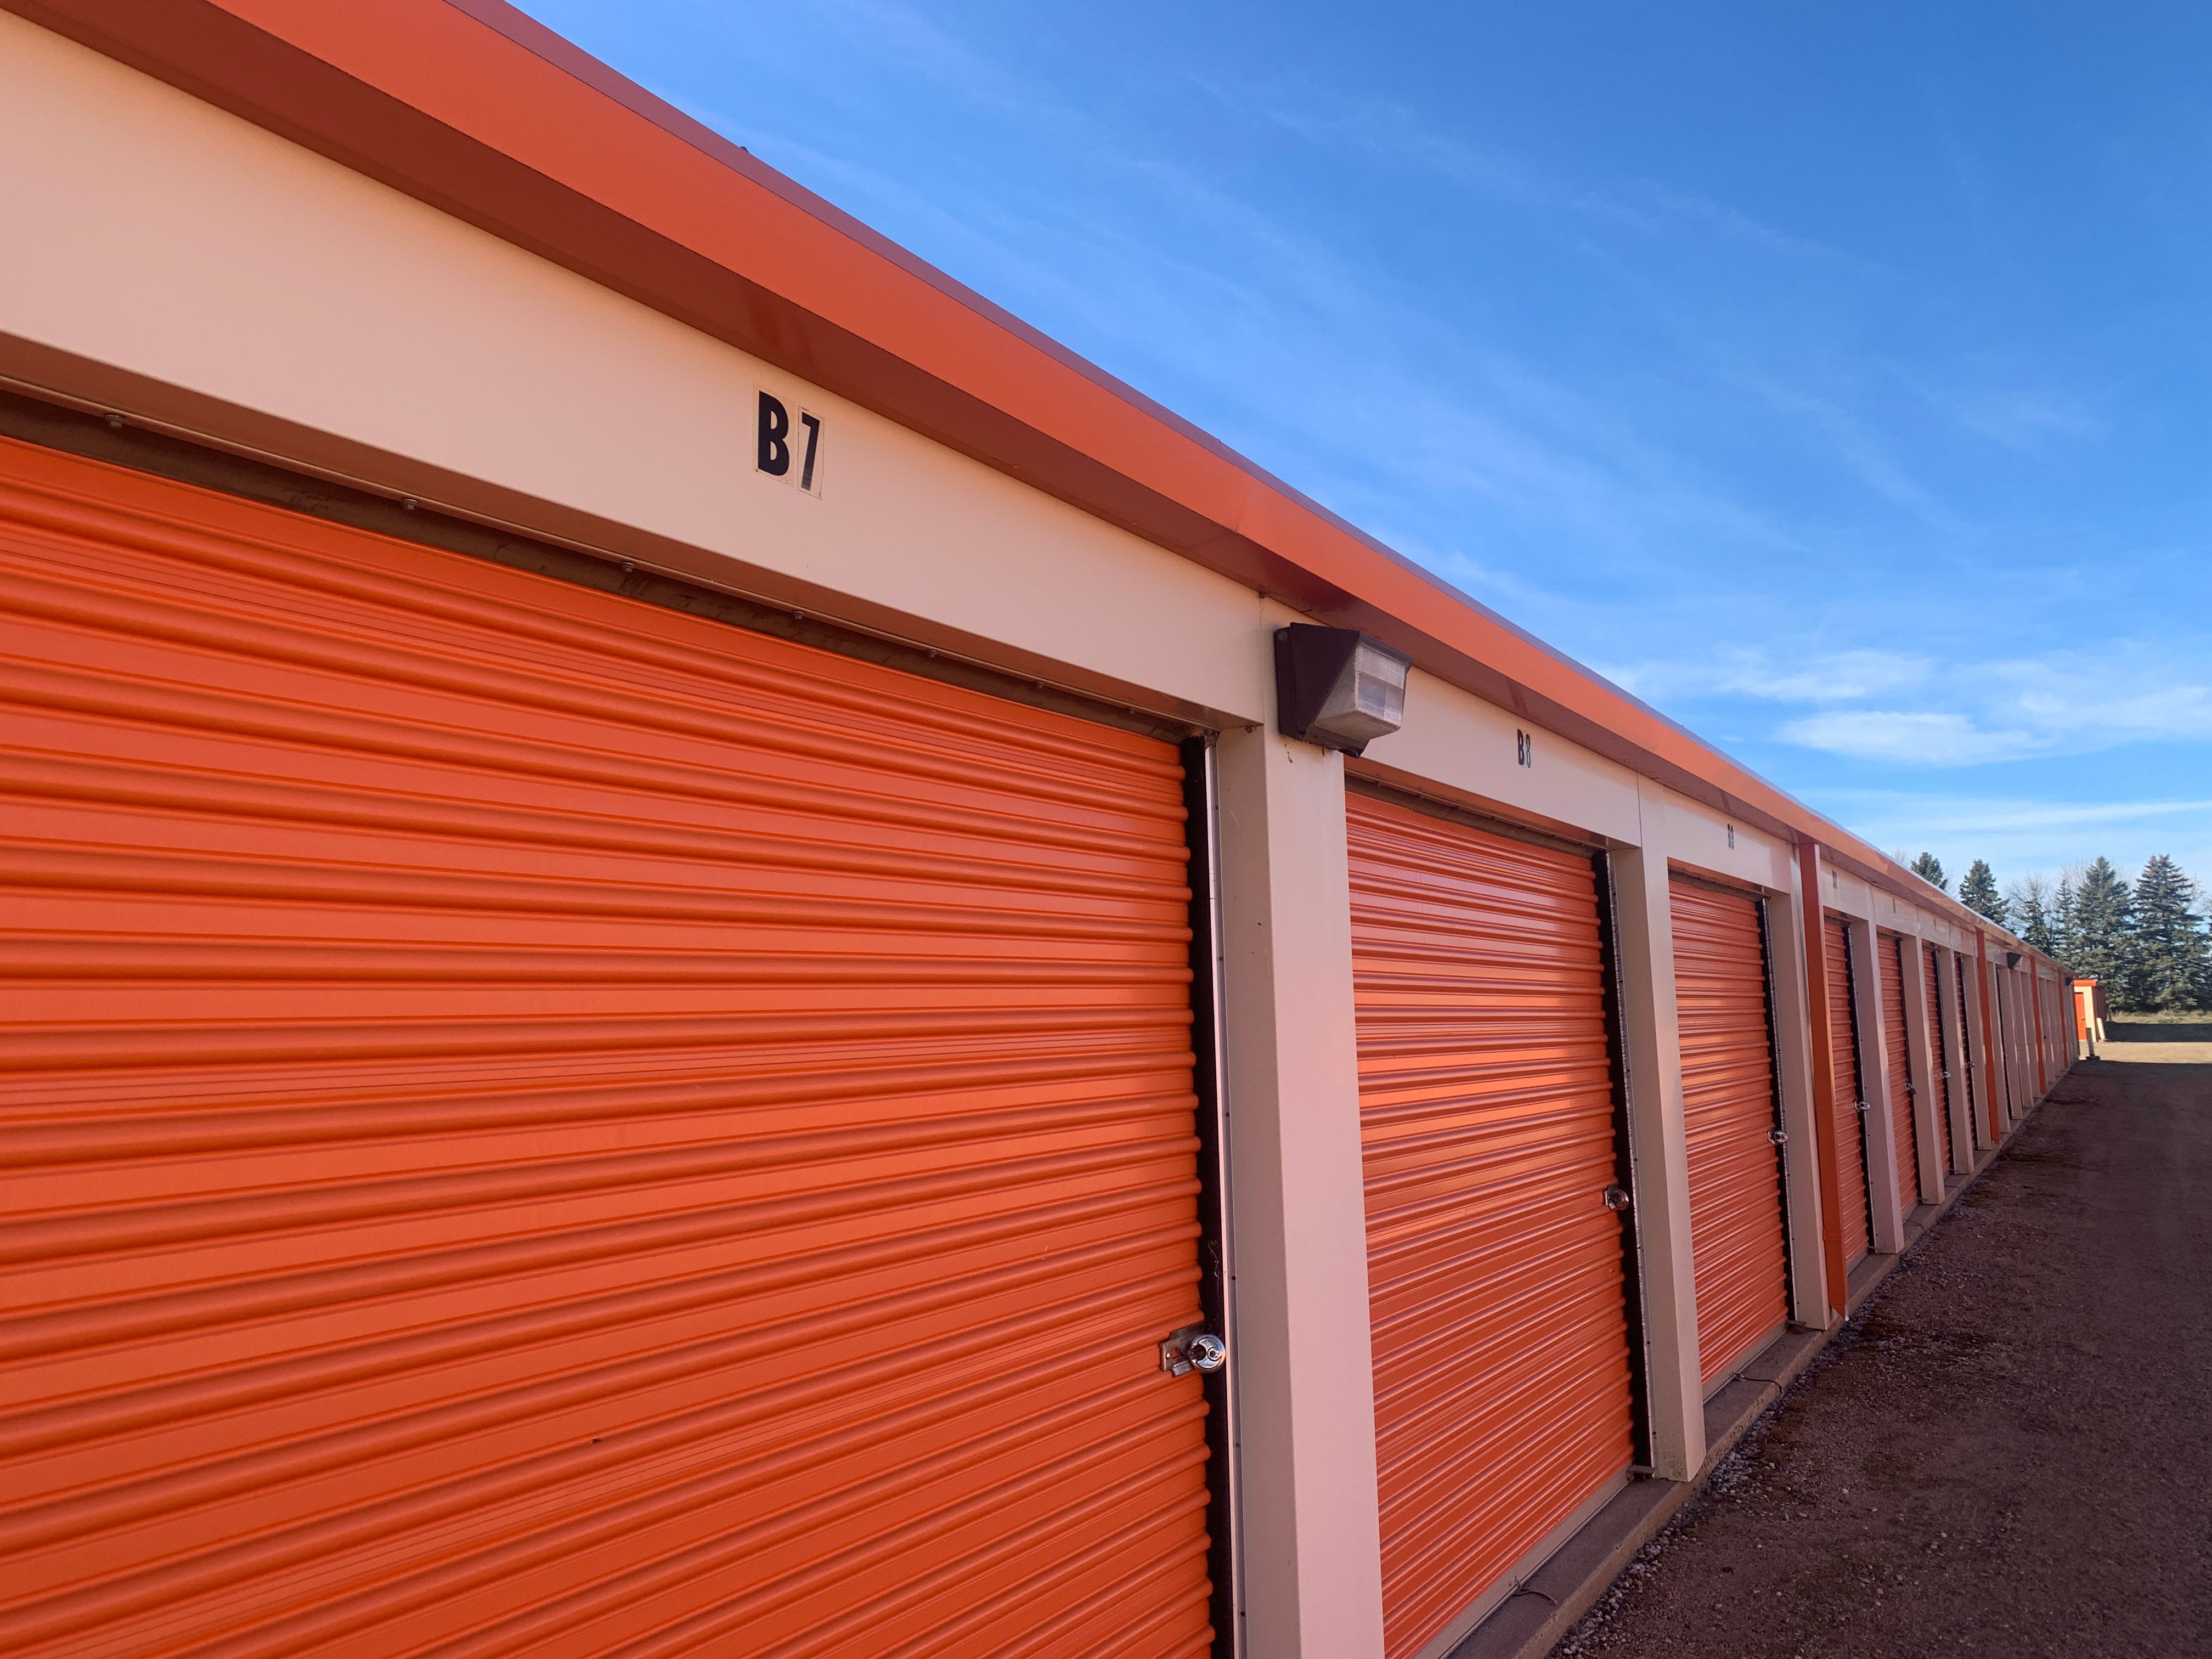 Learn more about boat and auto storage at KO Storage in Minot, North Dakota